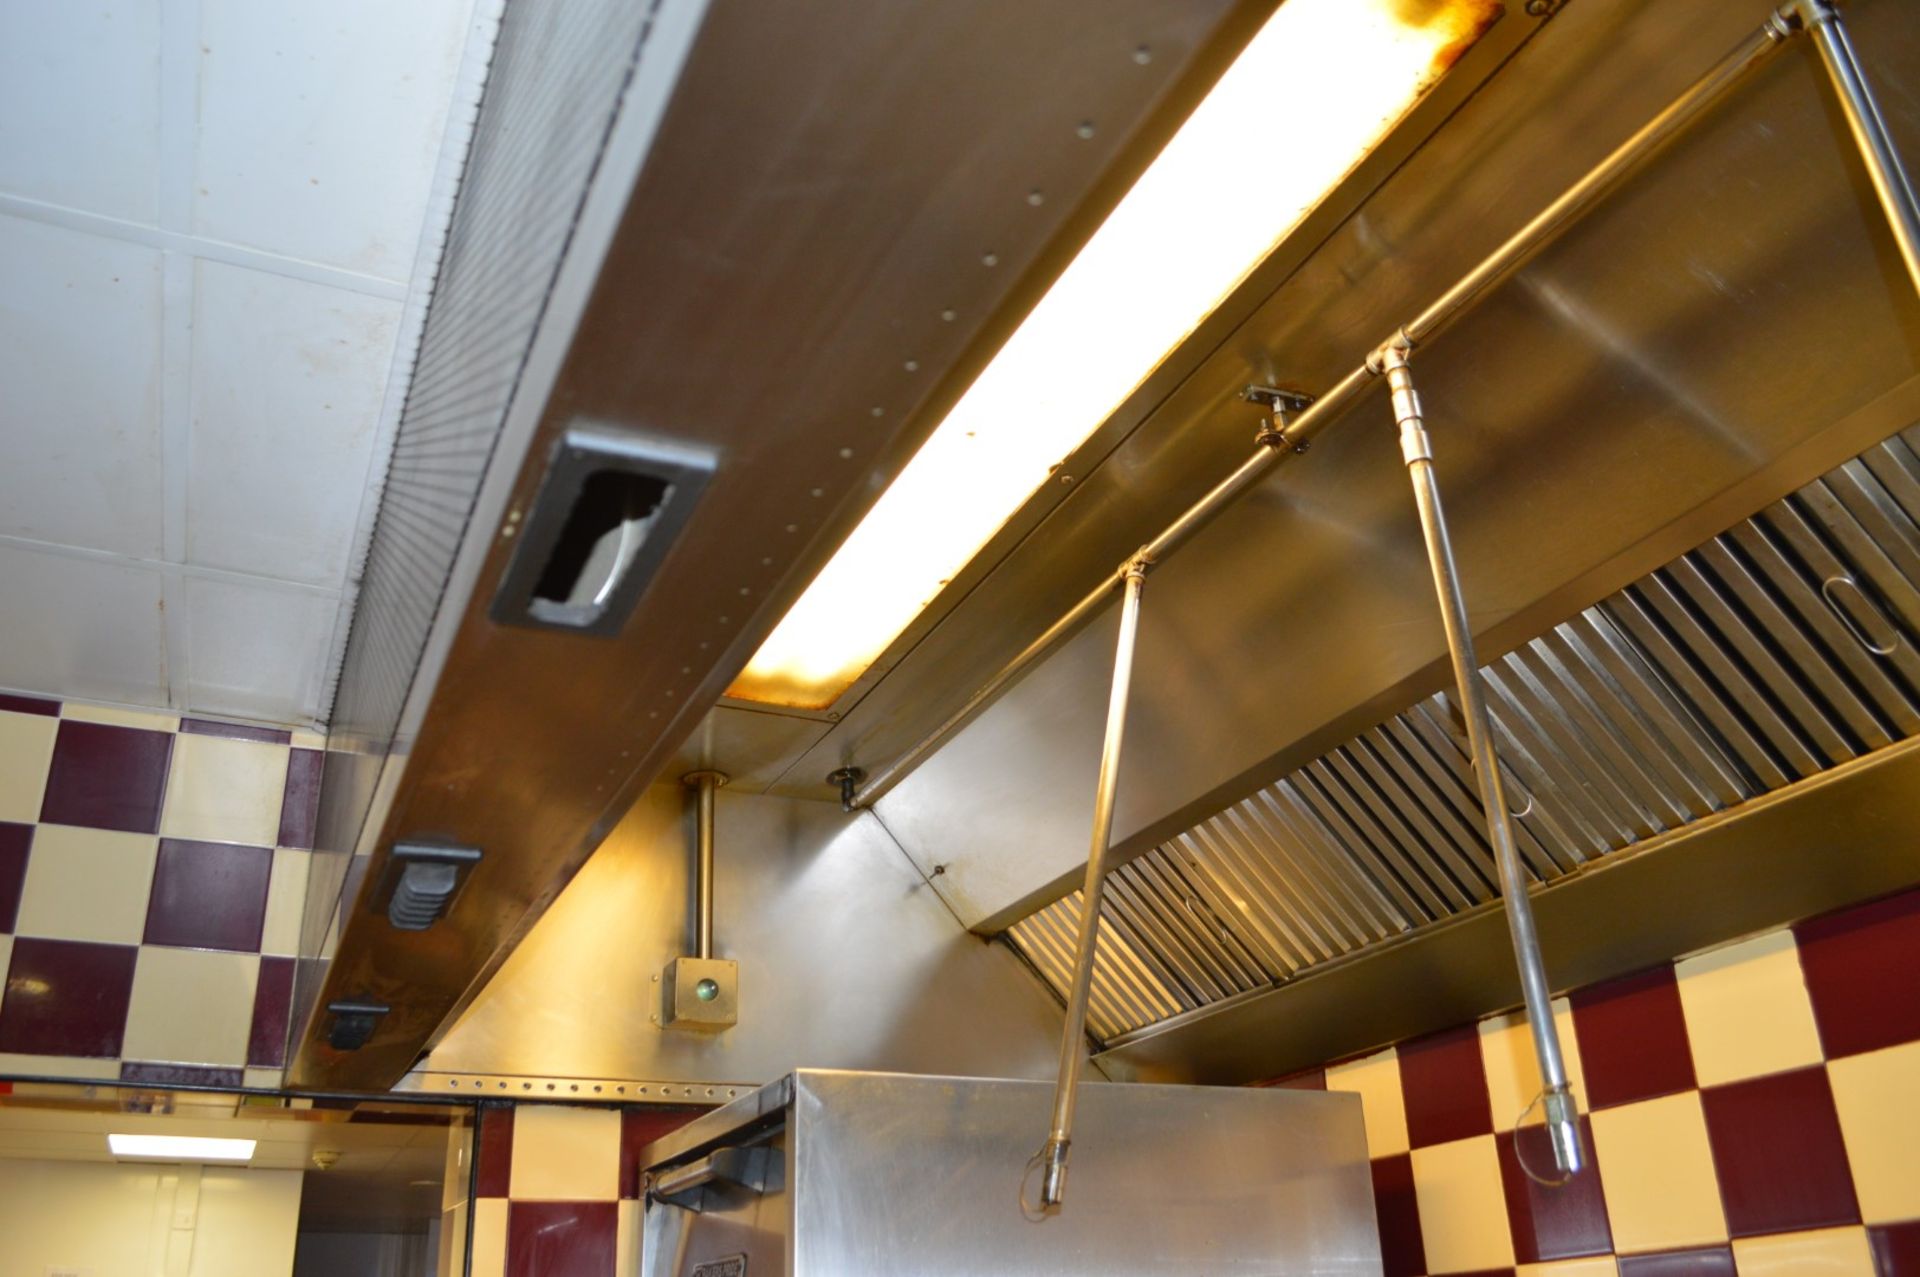 1 x Commercial Stainless Steel Kitchen Extractor Canopy With Ansul R-102 Fire Suppression System - - Image 10 of 13